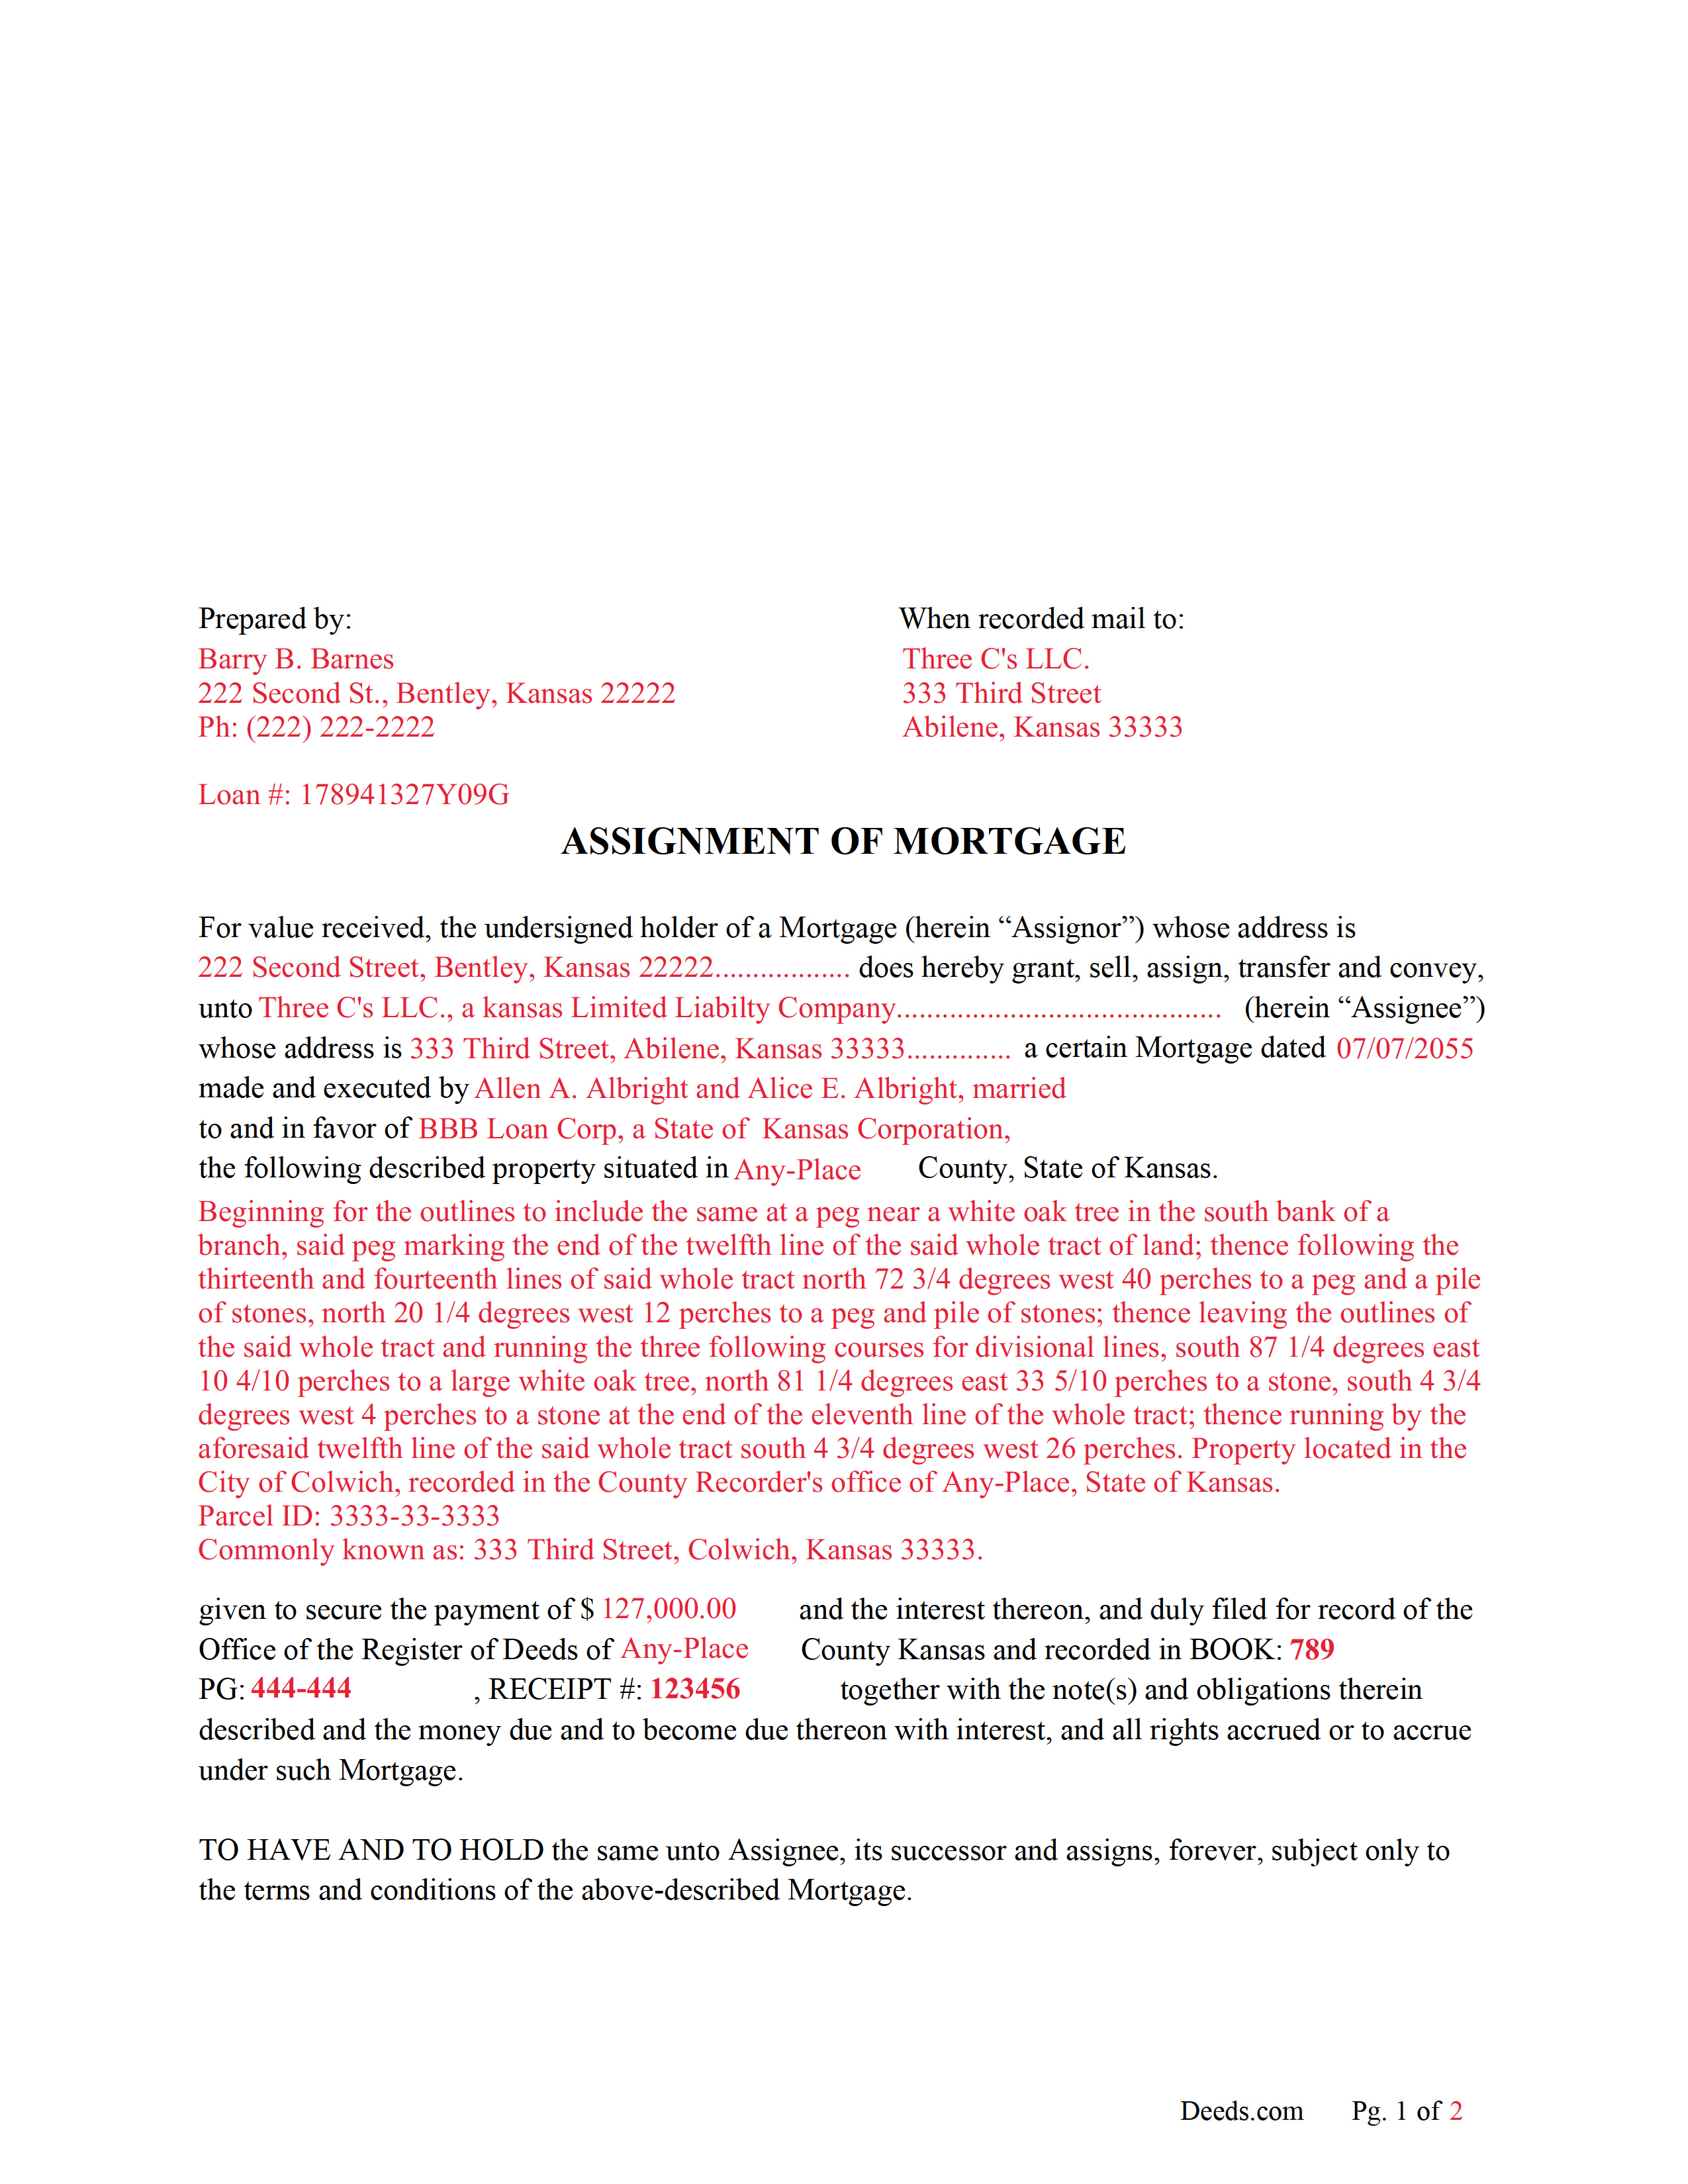 document definition assignment of mortgage